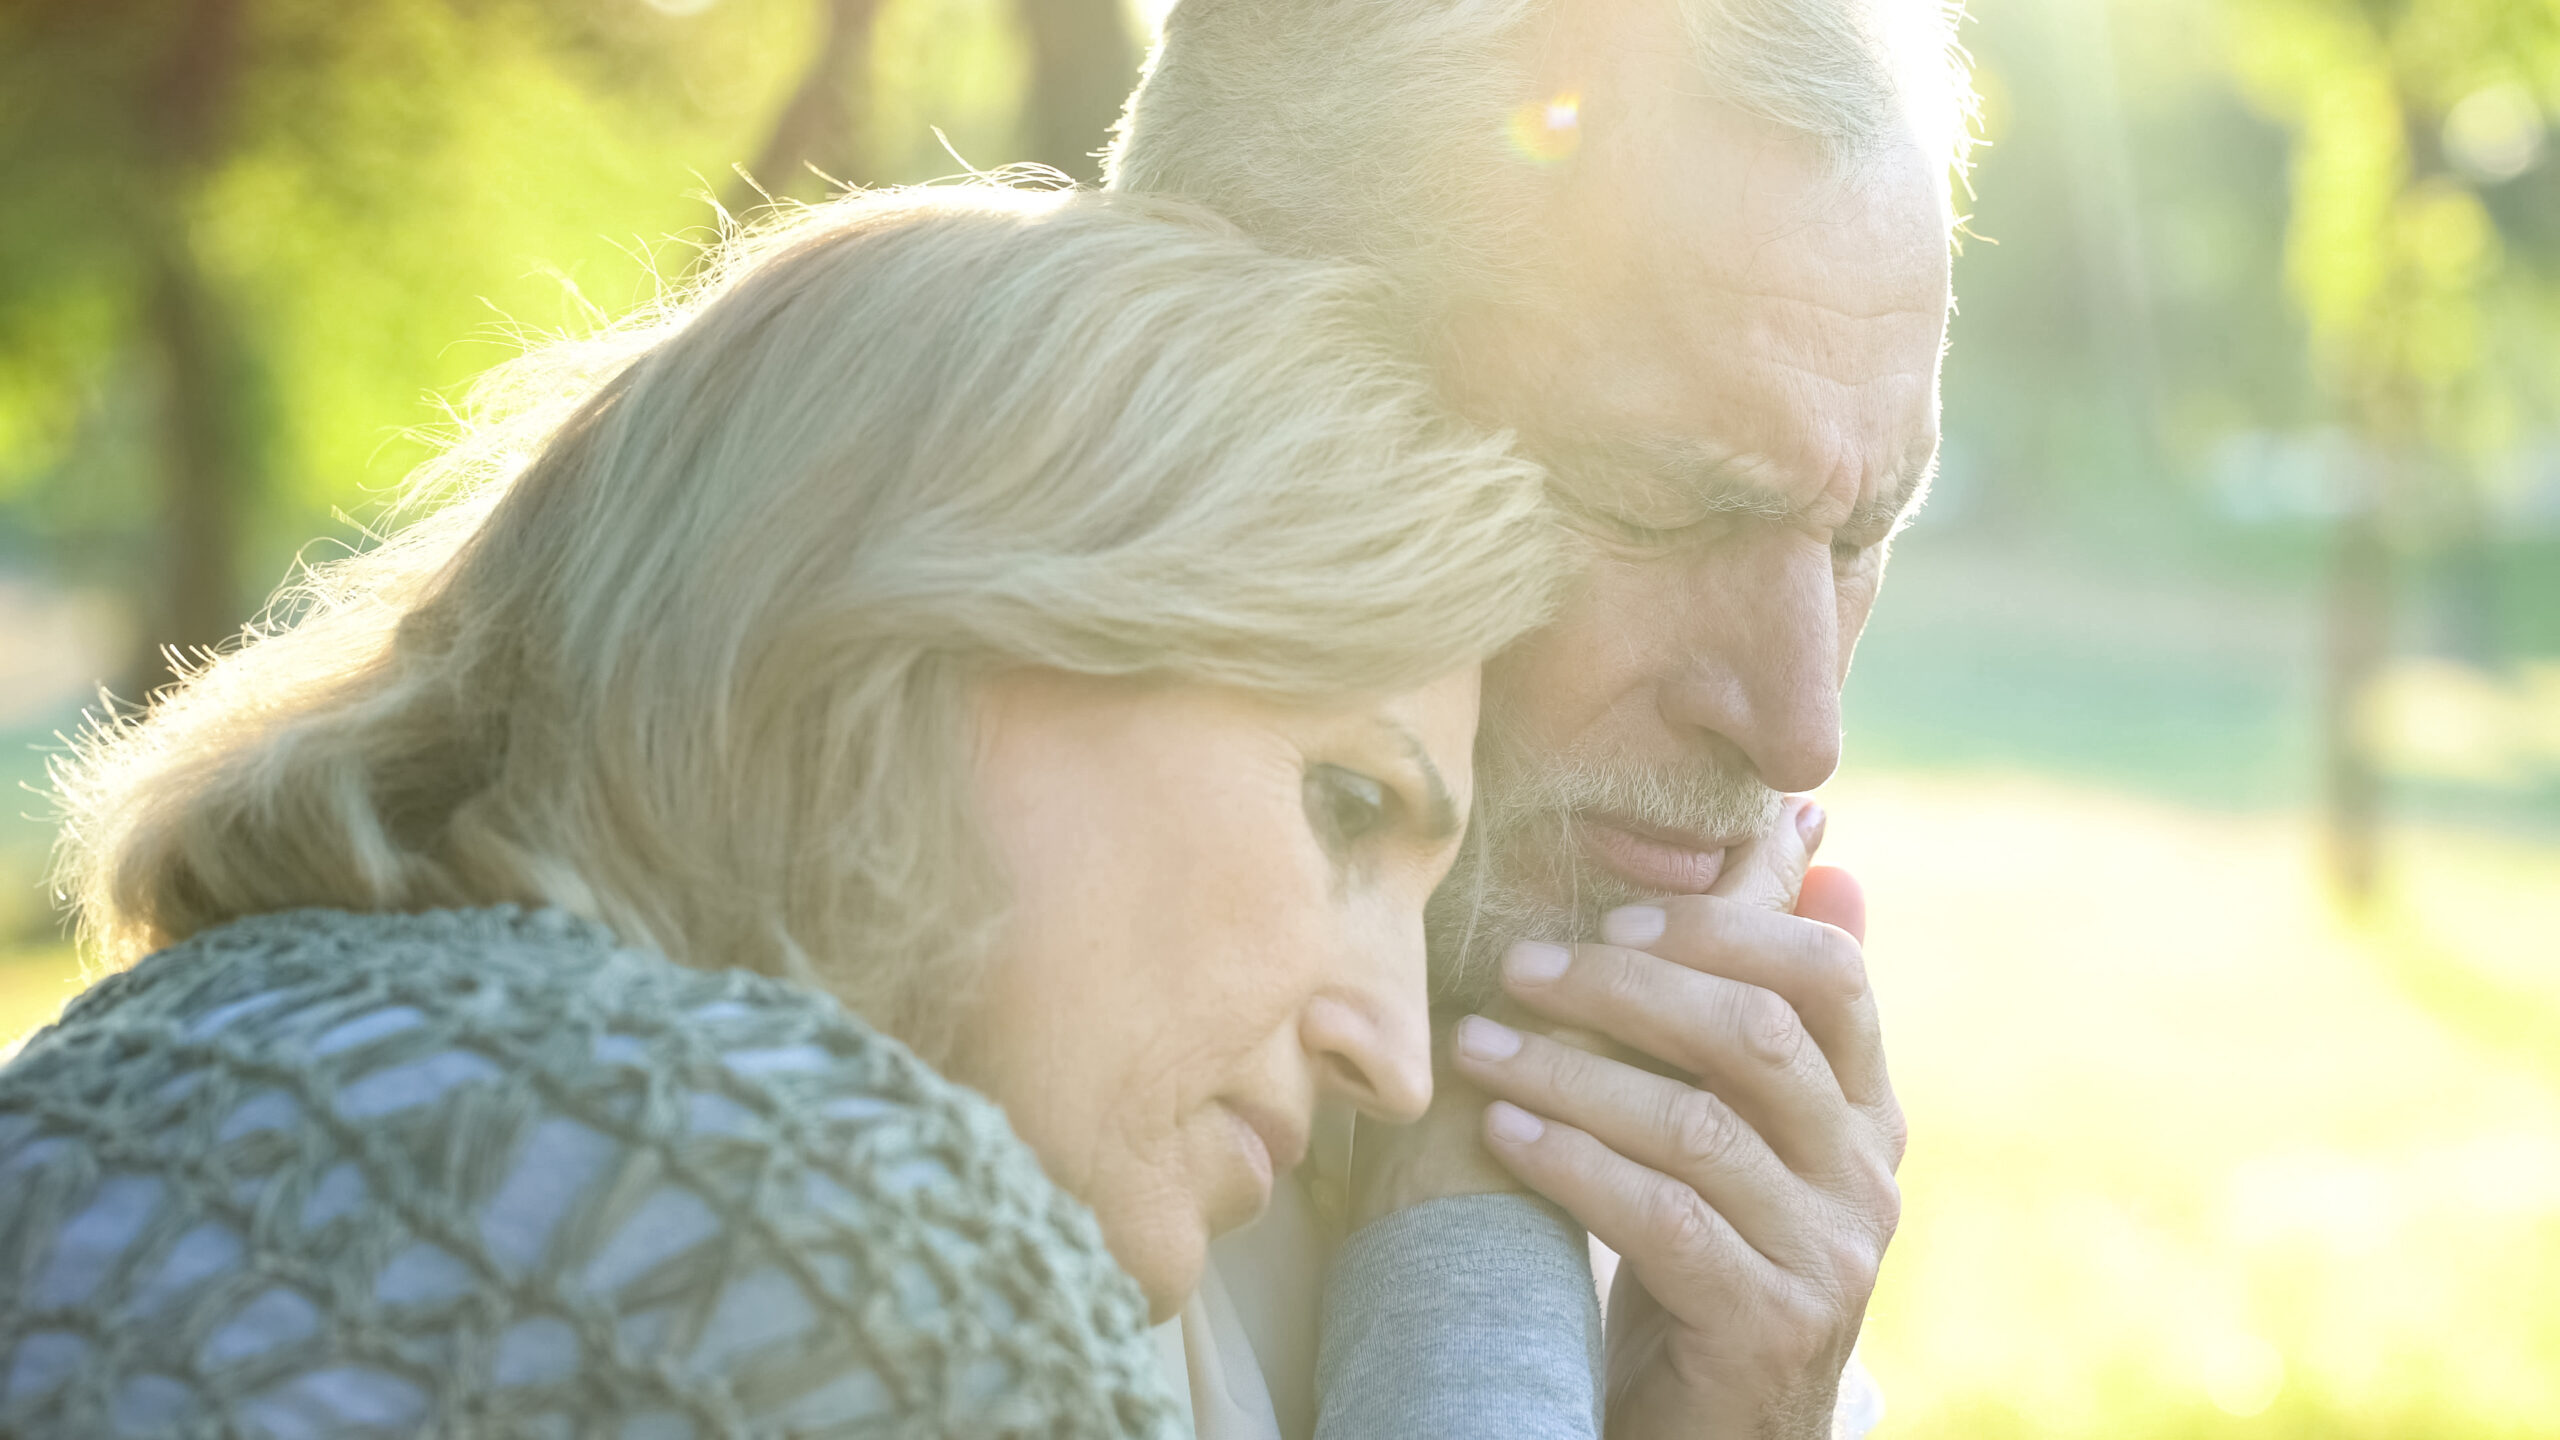 Tips to Create Healthy Goals and Maintain a Positive Outlook While Grieving